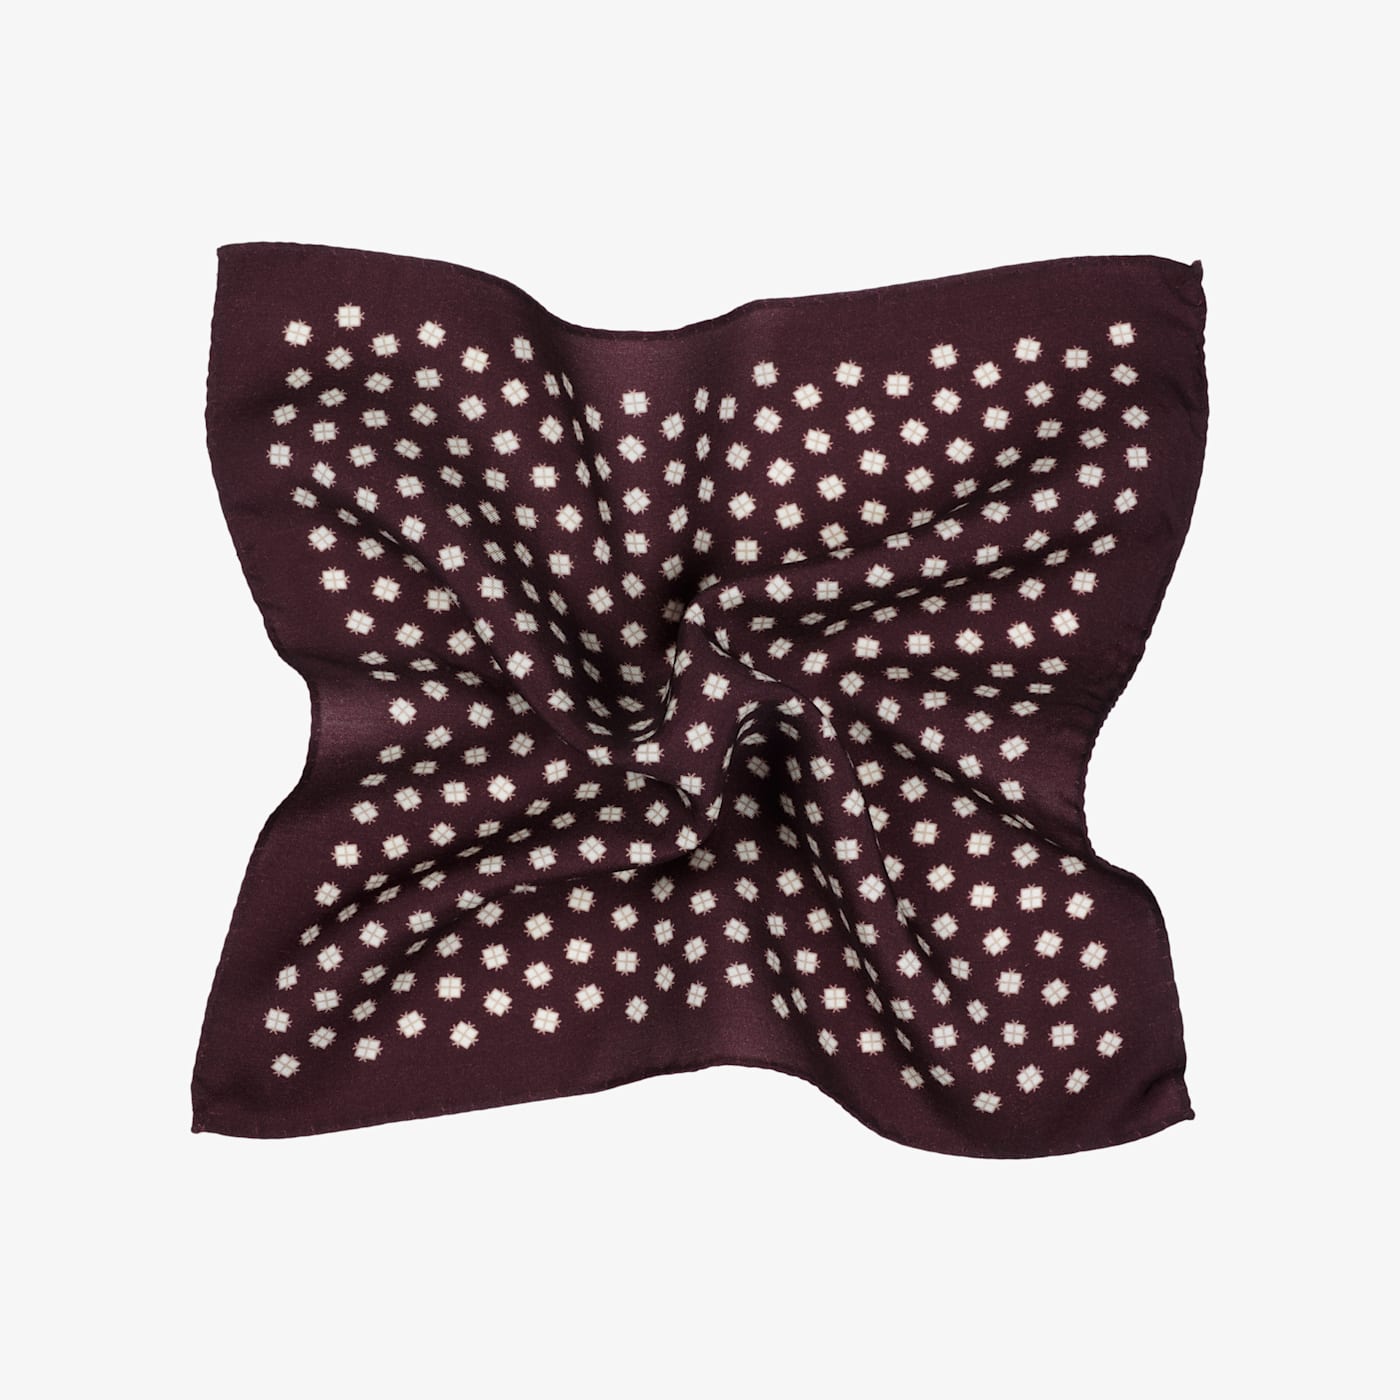 Suitsupply Burgundy Graphic Pocket Square In Brown